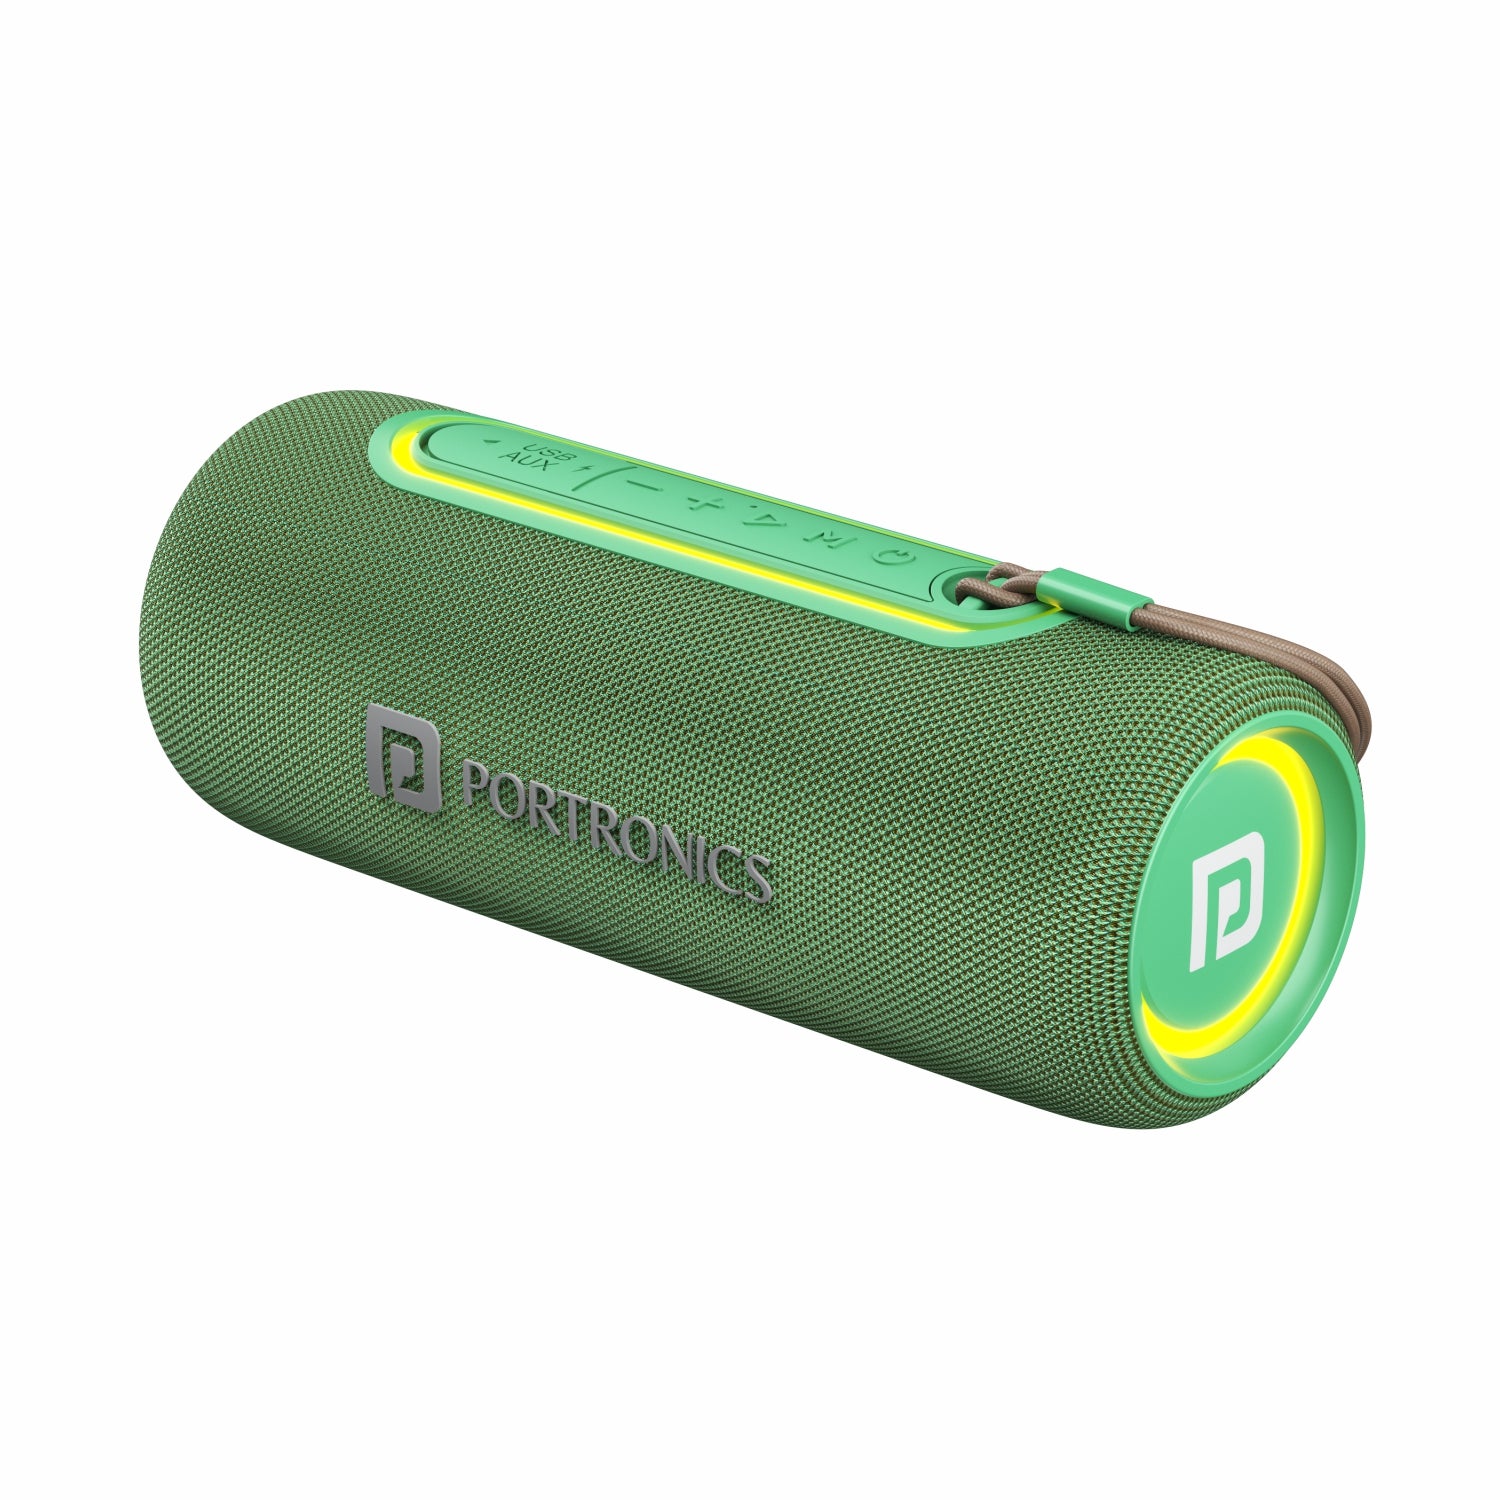 Portronics Resound 2 Bluetooth wireless Speaker and bluetooth speakers with mic for iOS & Android. Green